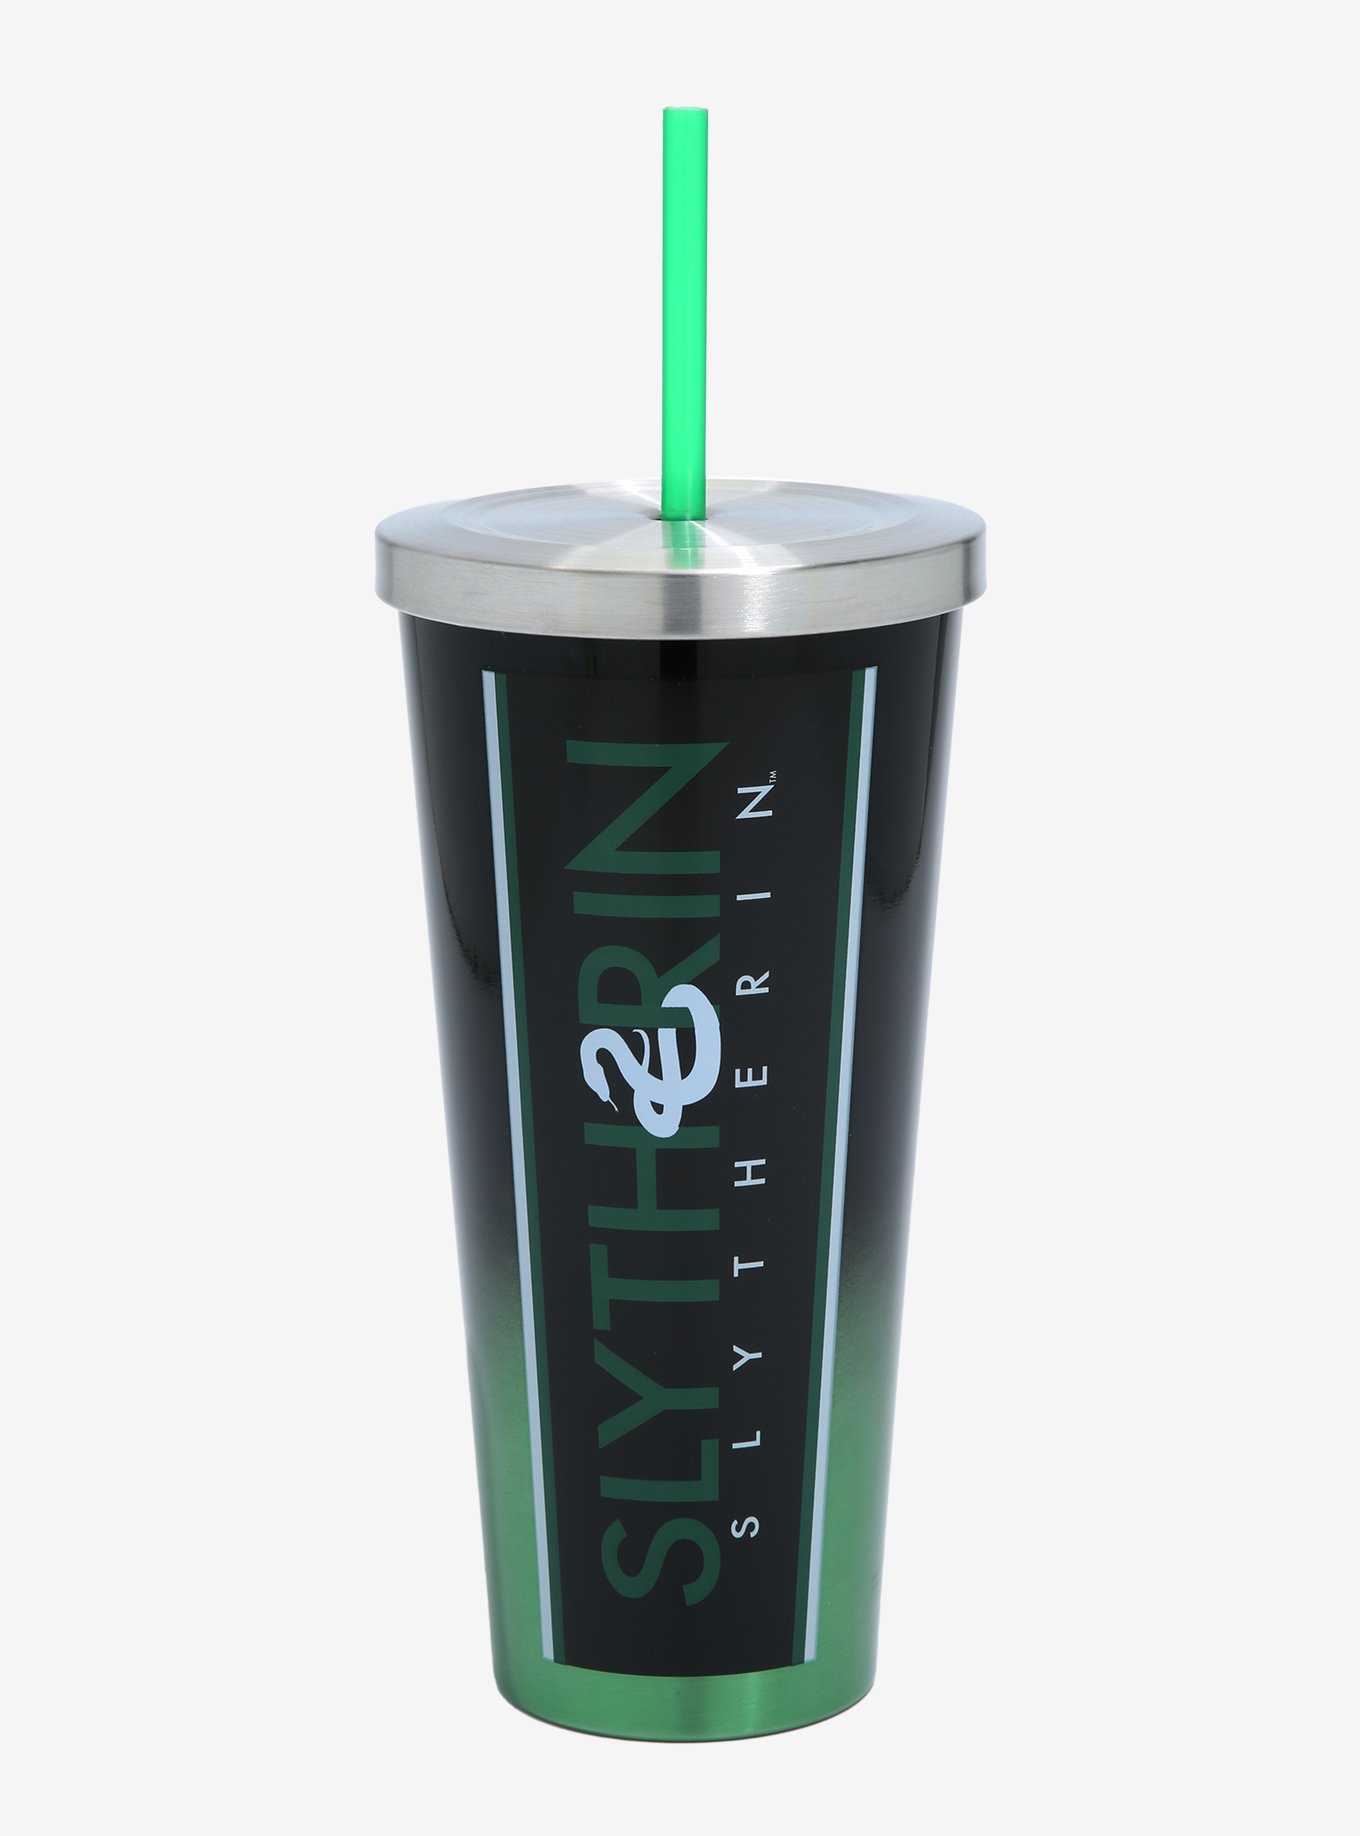 Stitch Disney Inspired Starbucks Cold Cup Tumbler. Can Be Personalised.  Straw Topper Optional. Great Gift Idea. 